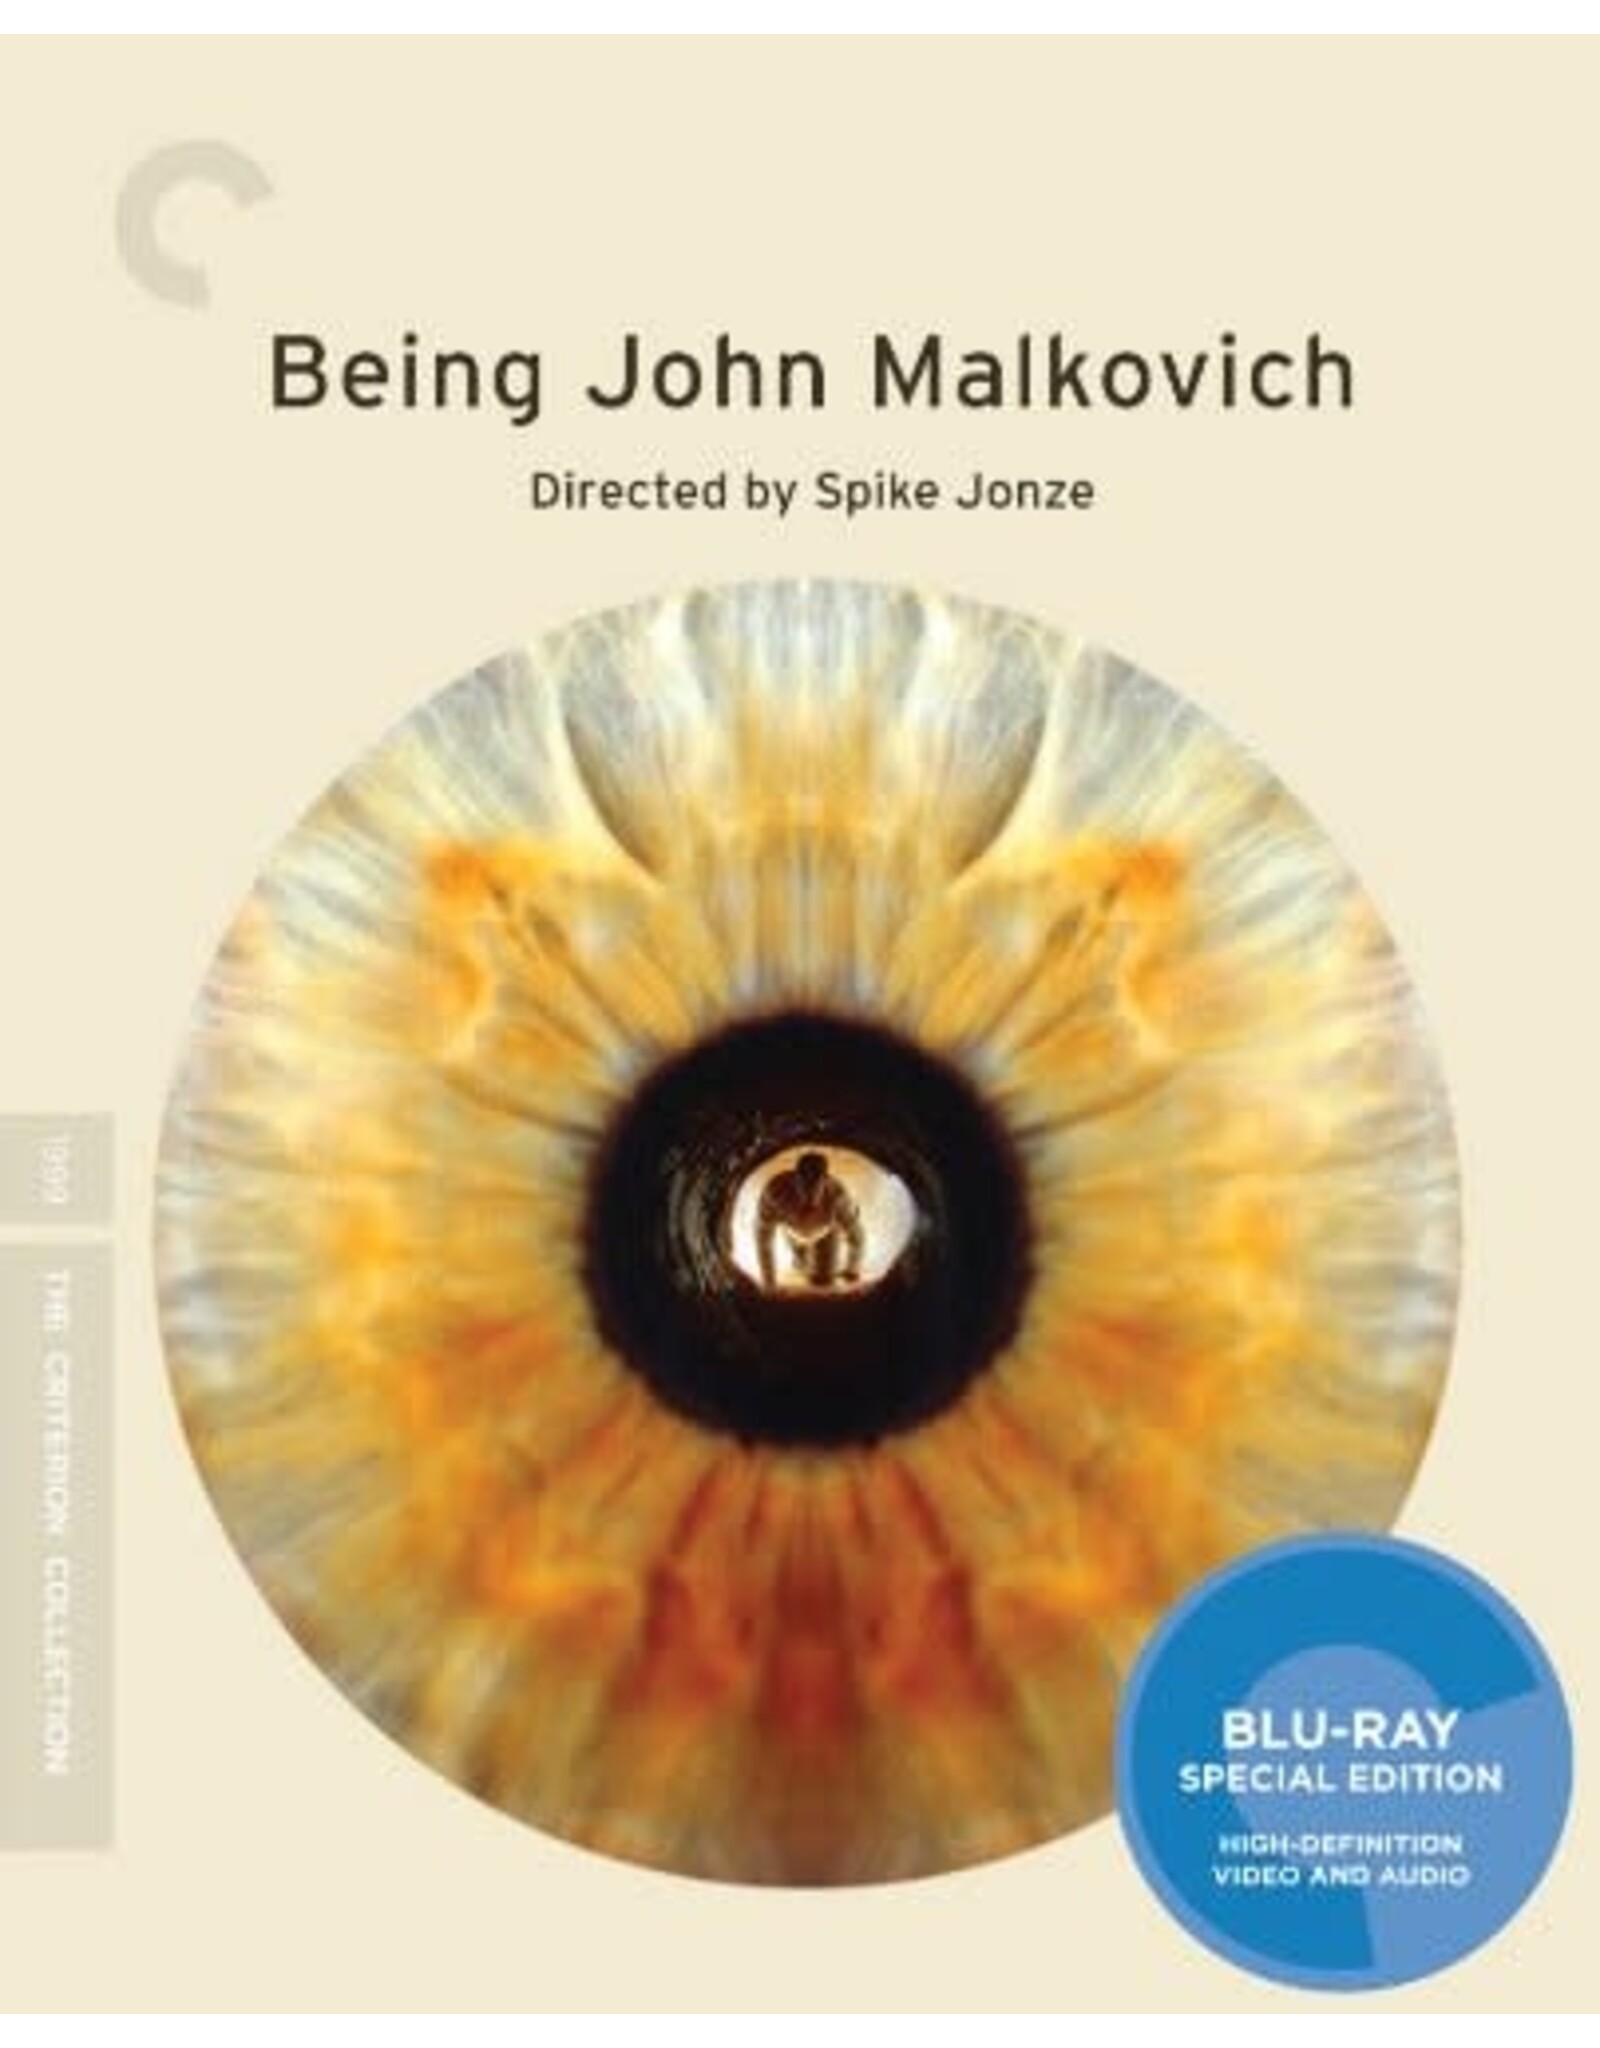 Criterion Collection Being John Malkovich - Criterion Collection (Used)